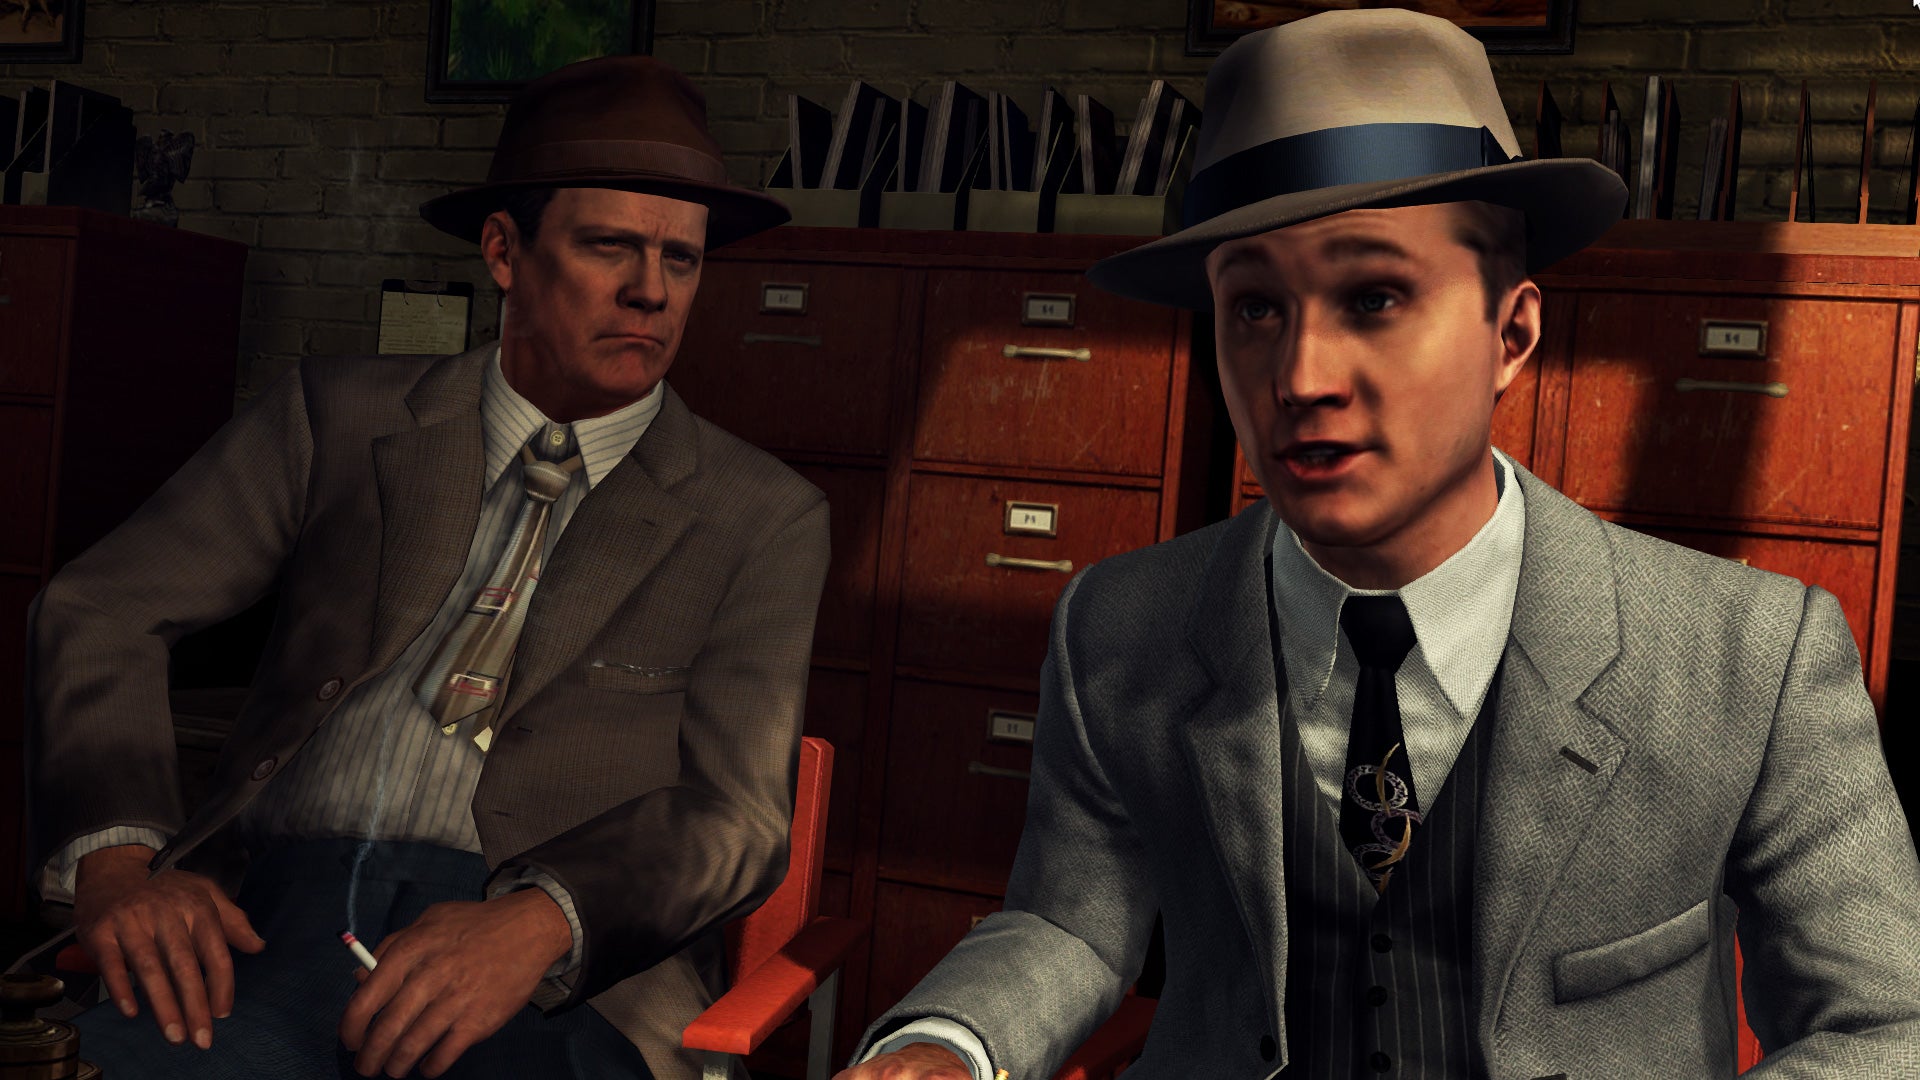 Two detectives from LA Noire